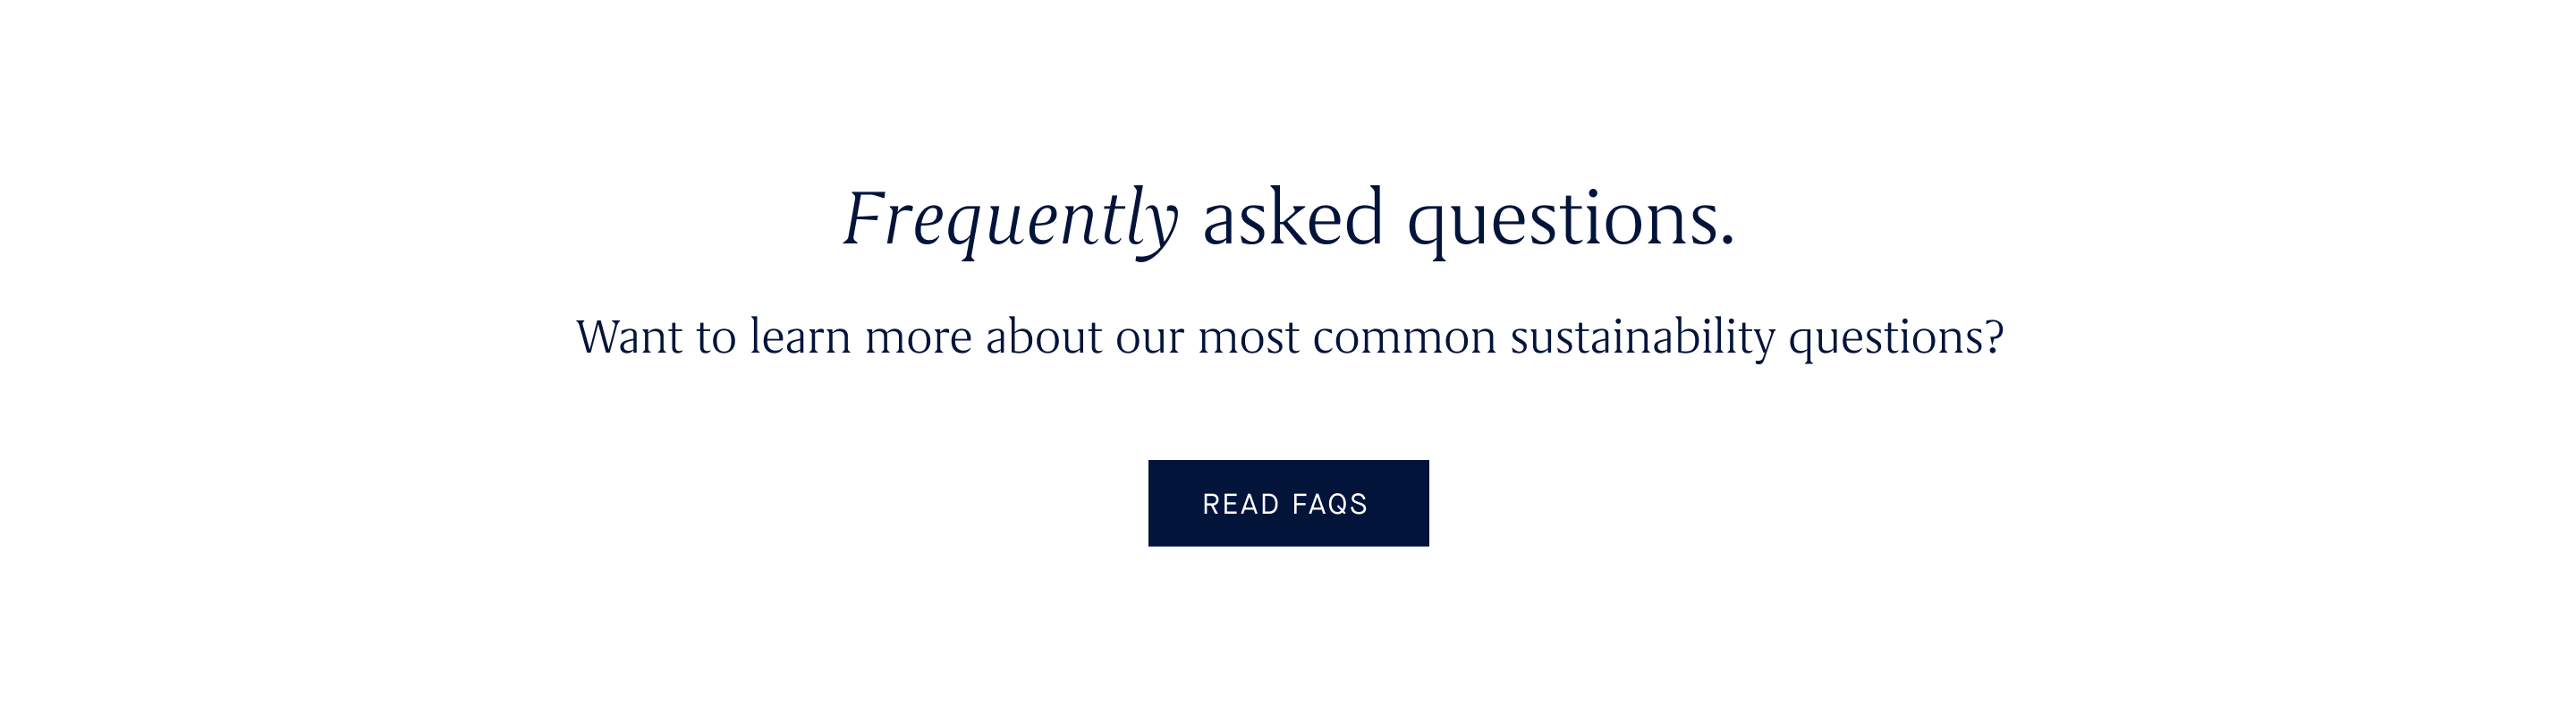 Frequently asked questions. Want to learn more about our most common sustainability questions? Read more.